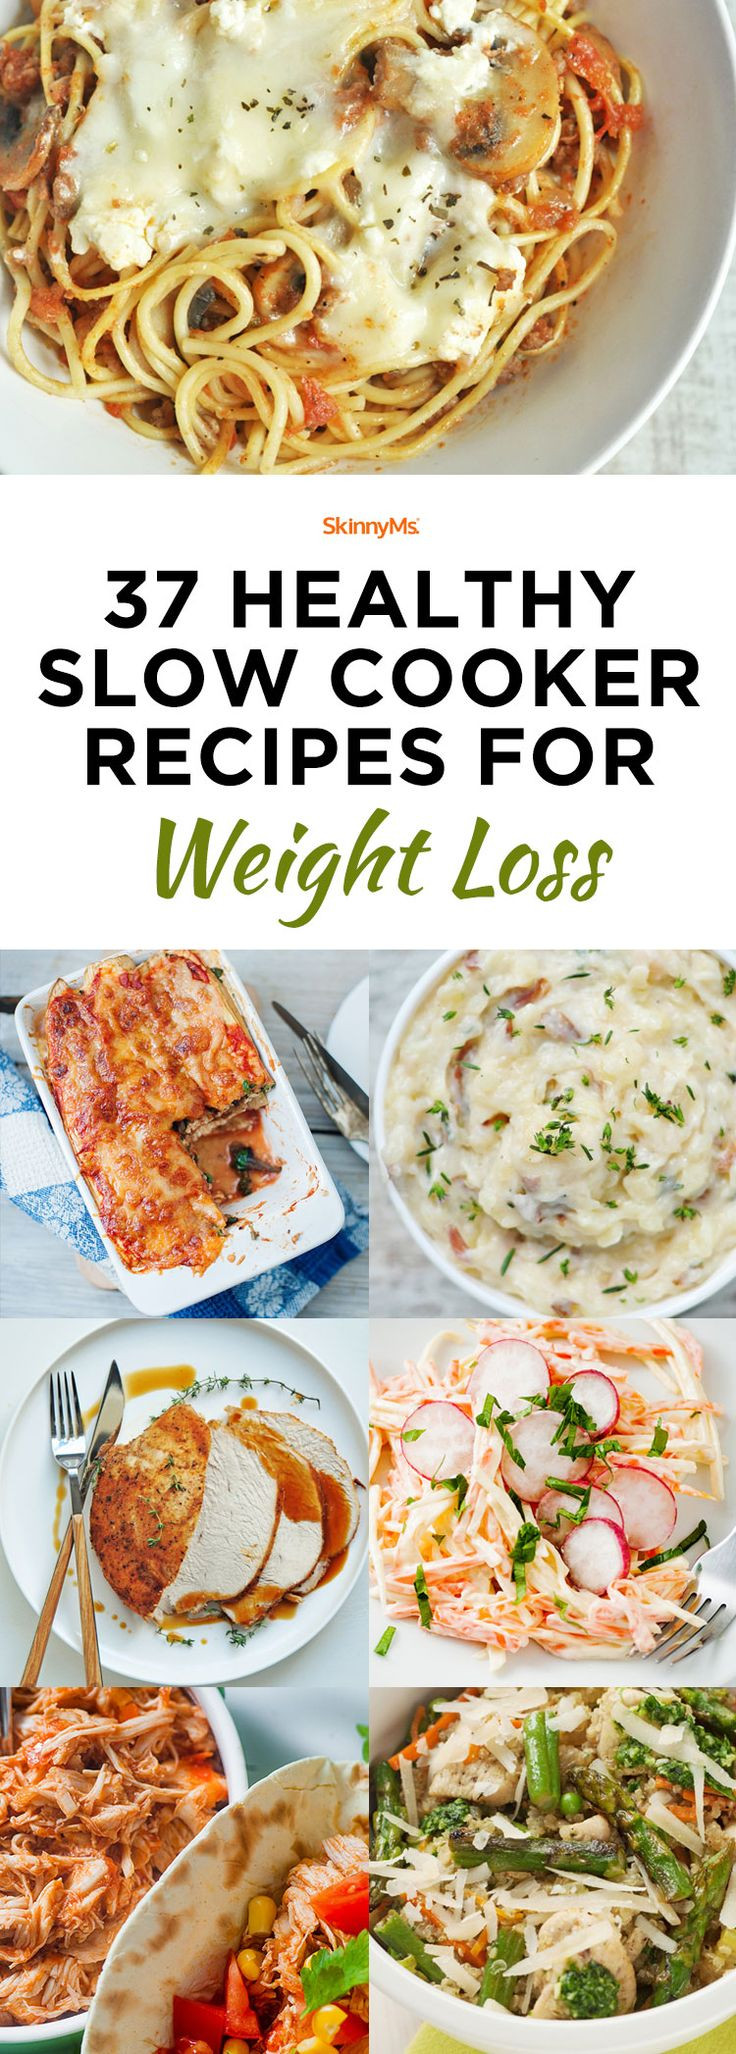 Healthy Slow Cooker Recipes For Weight Loss
 best Skinny Ms Eats images on Pinterest